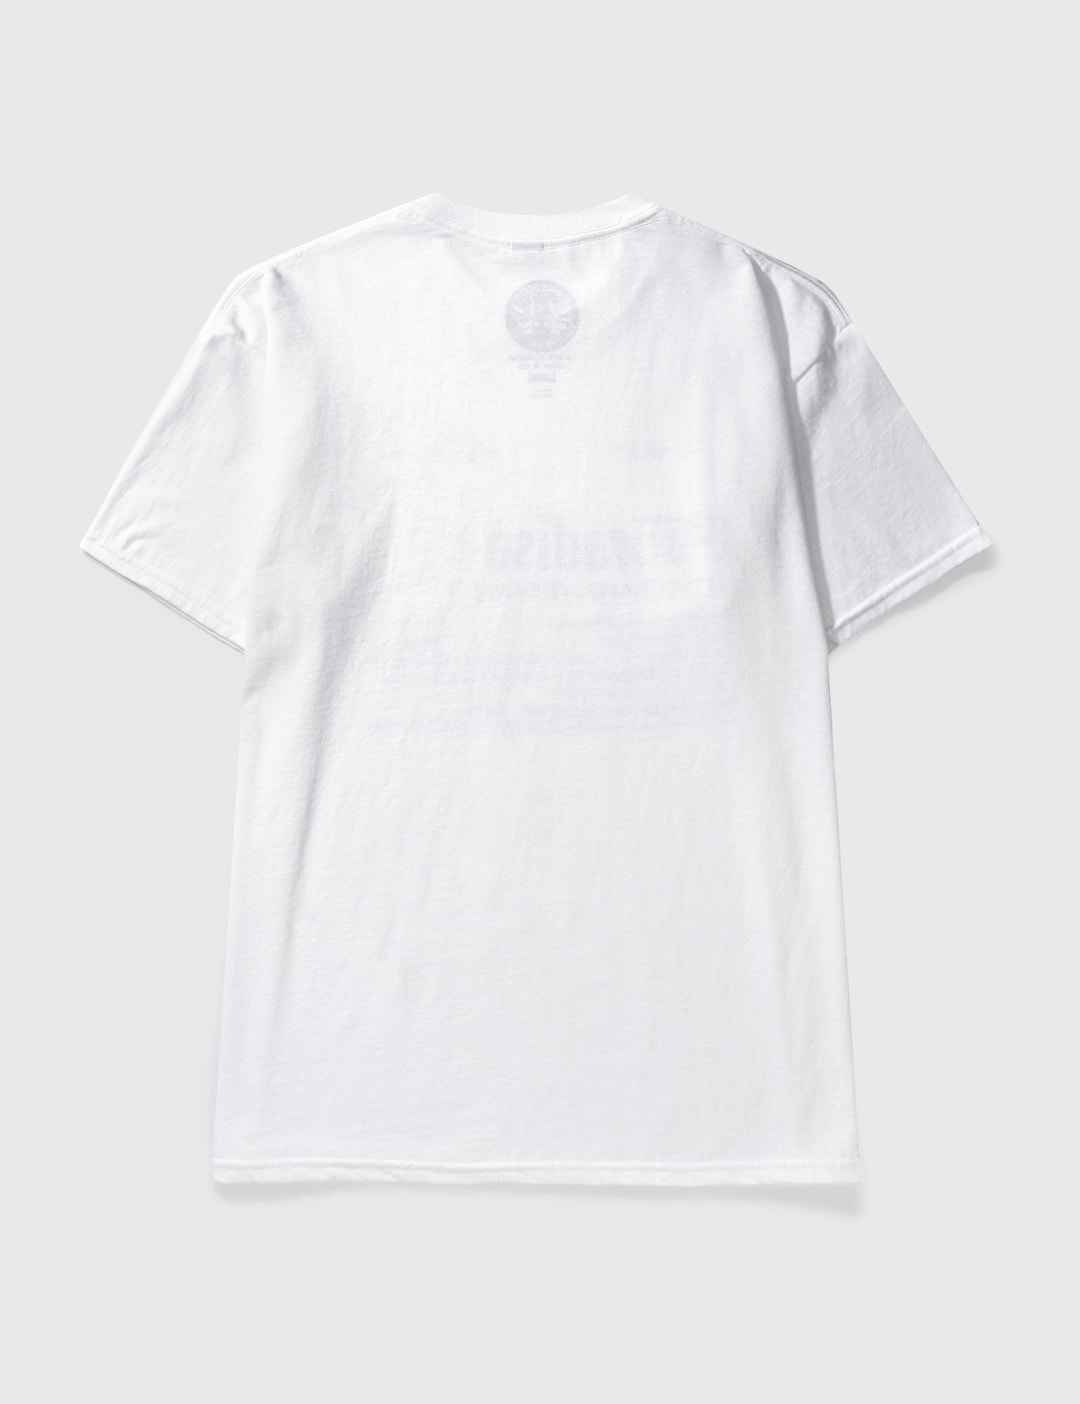 Paradise NYC - Quaalude T-shirt | HBX - Globally Curated Fashion and ...